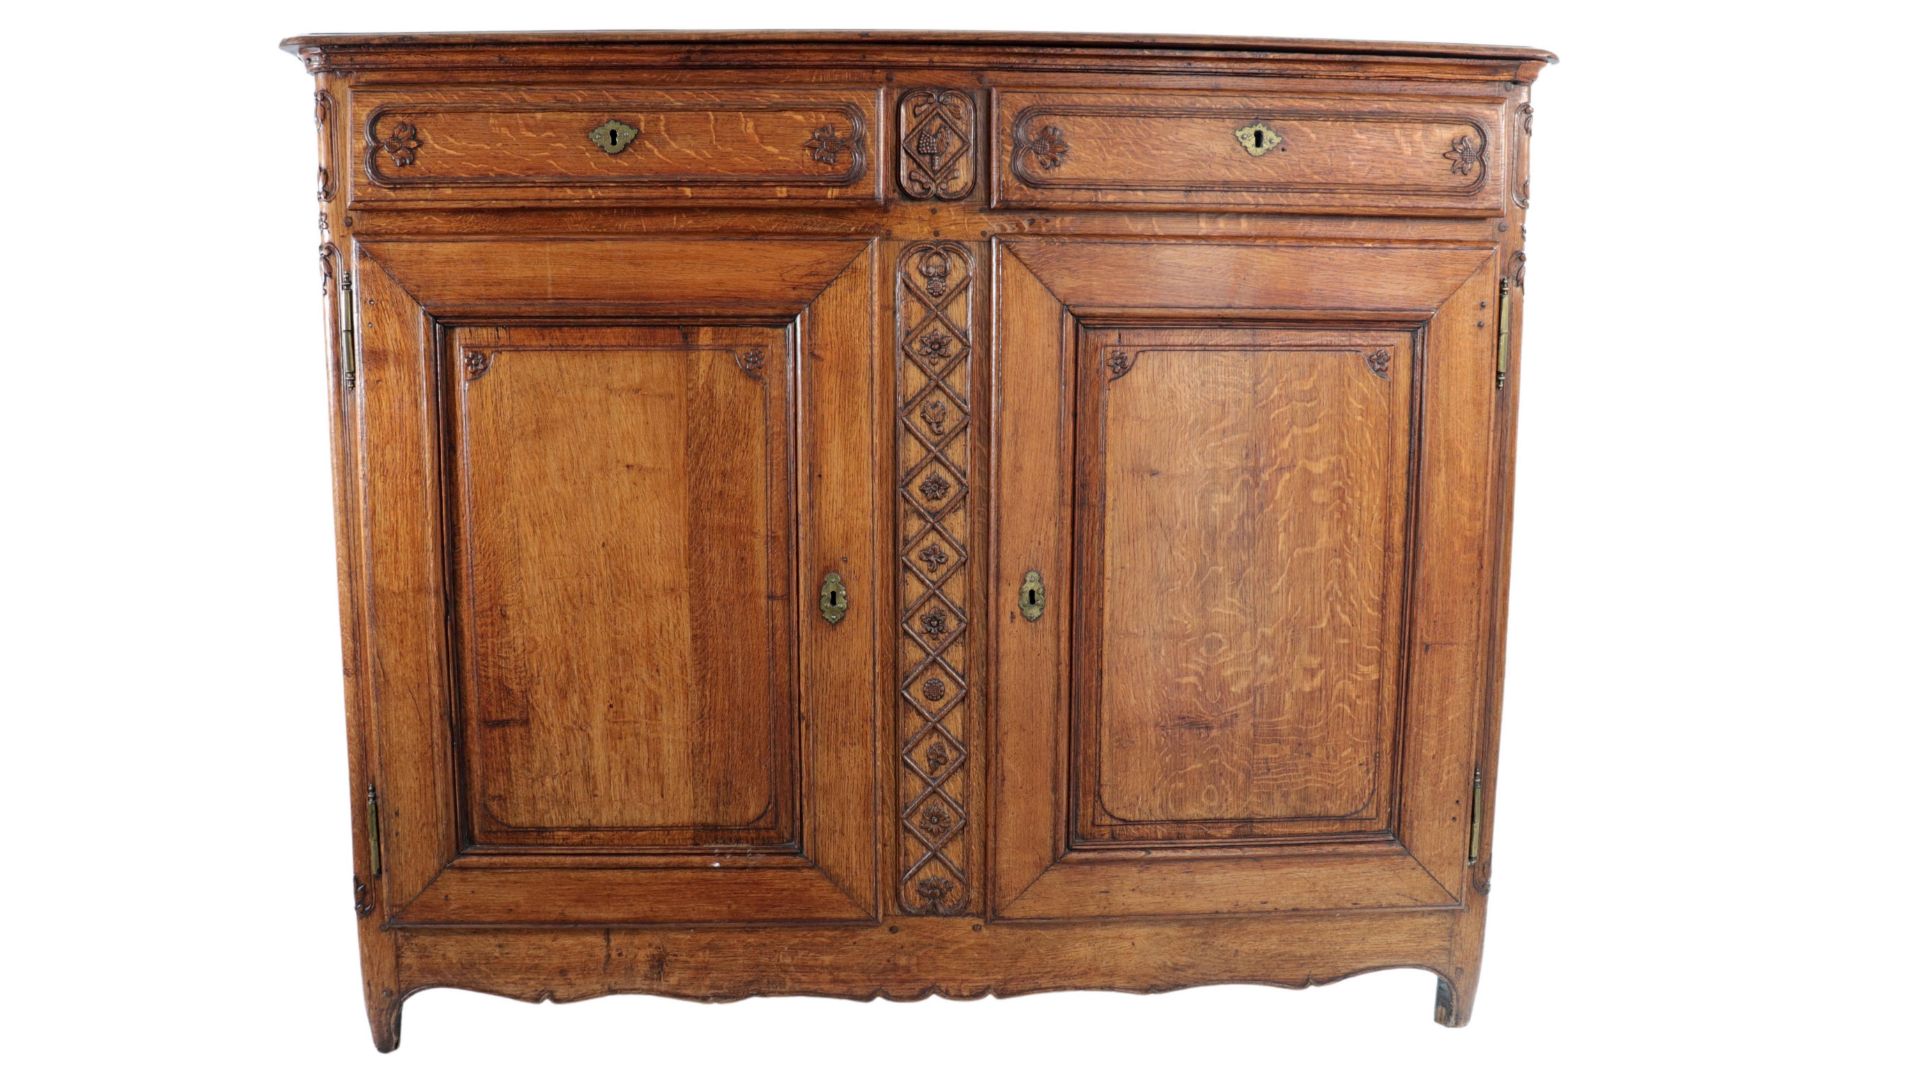 18th century lightly carved furniture